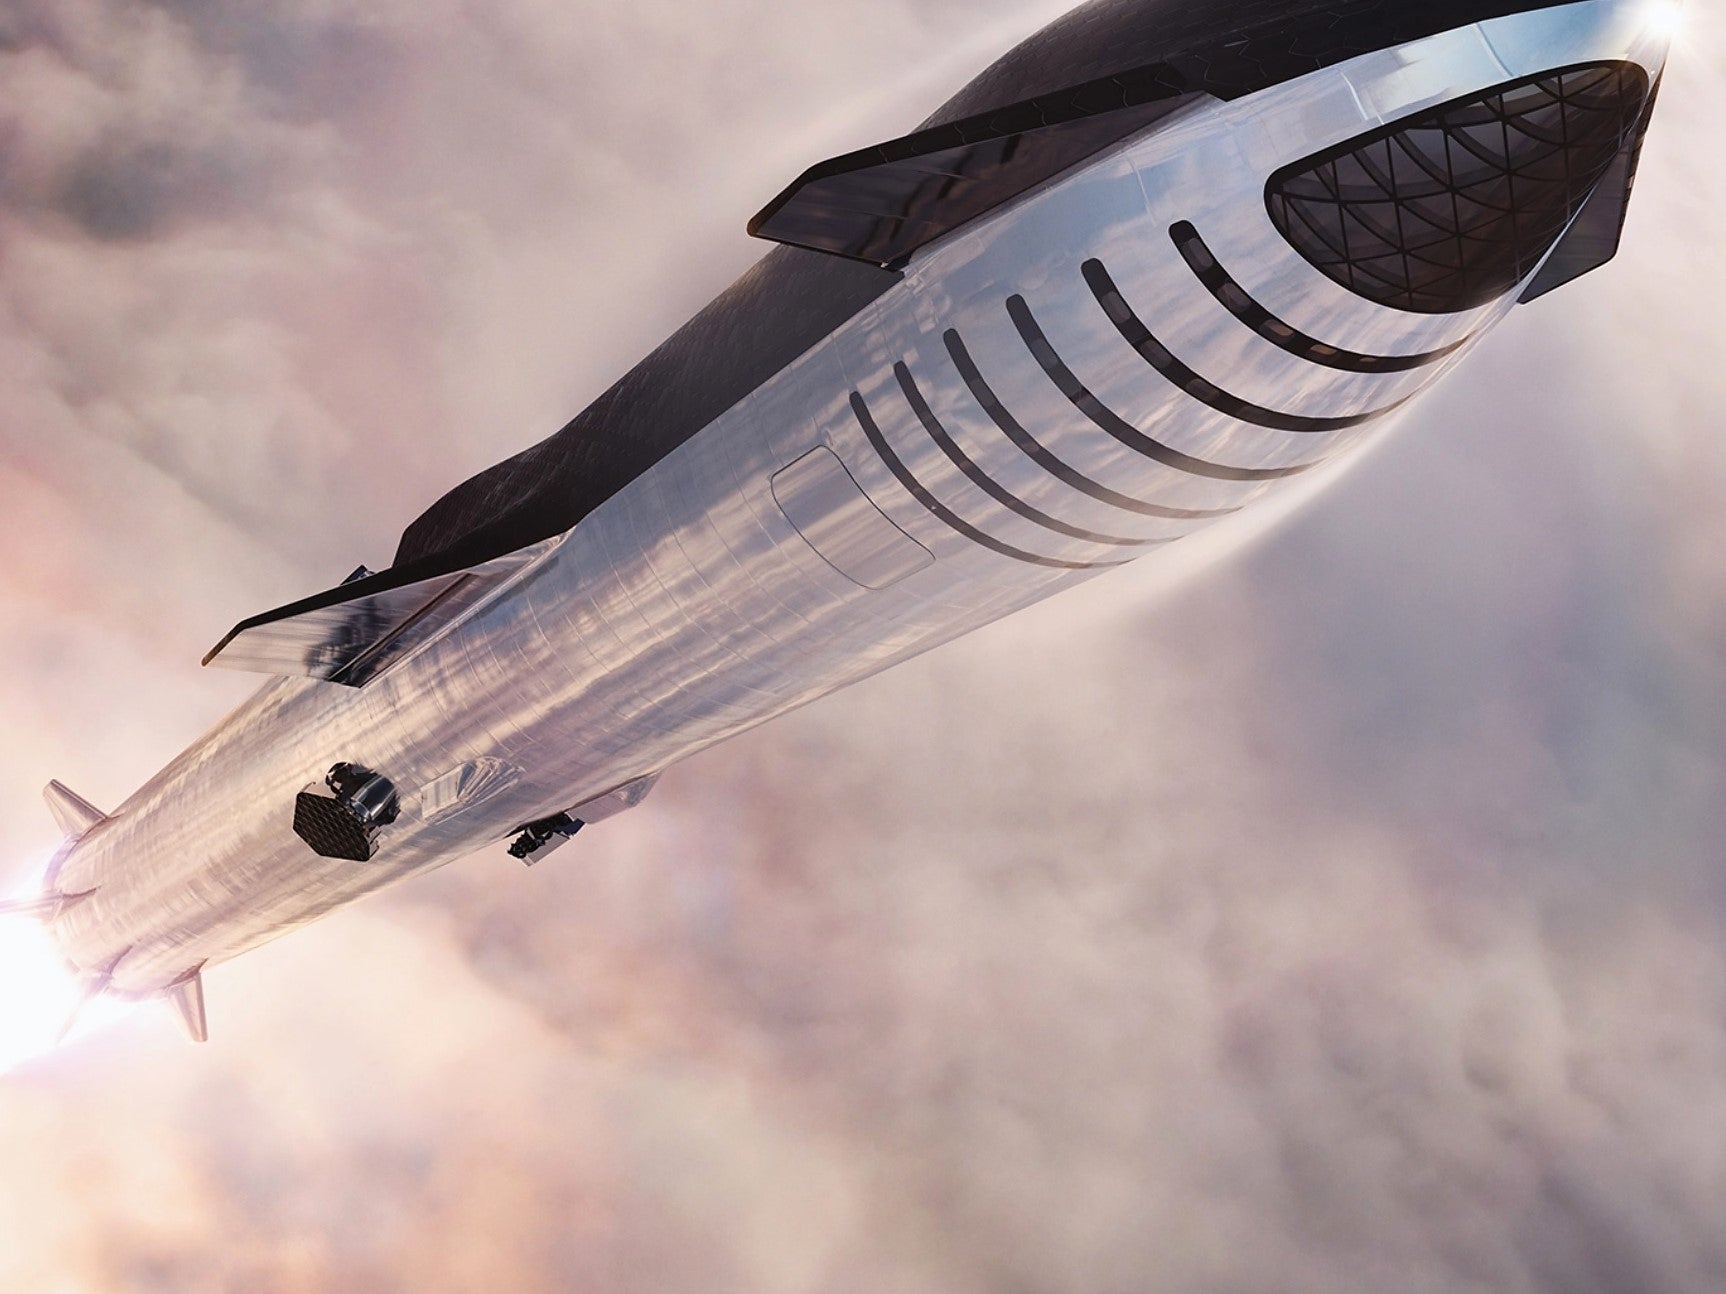 SpaceX hopes to manufacture 100 Starship rockets every year to transport people and cargo around the Solar System